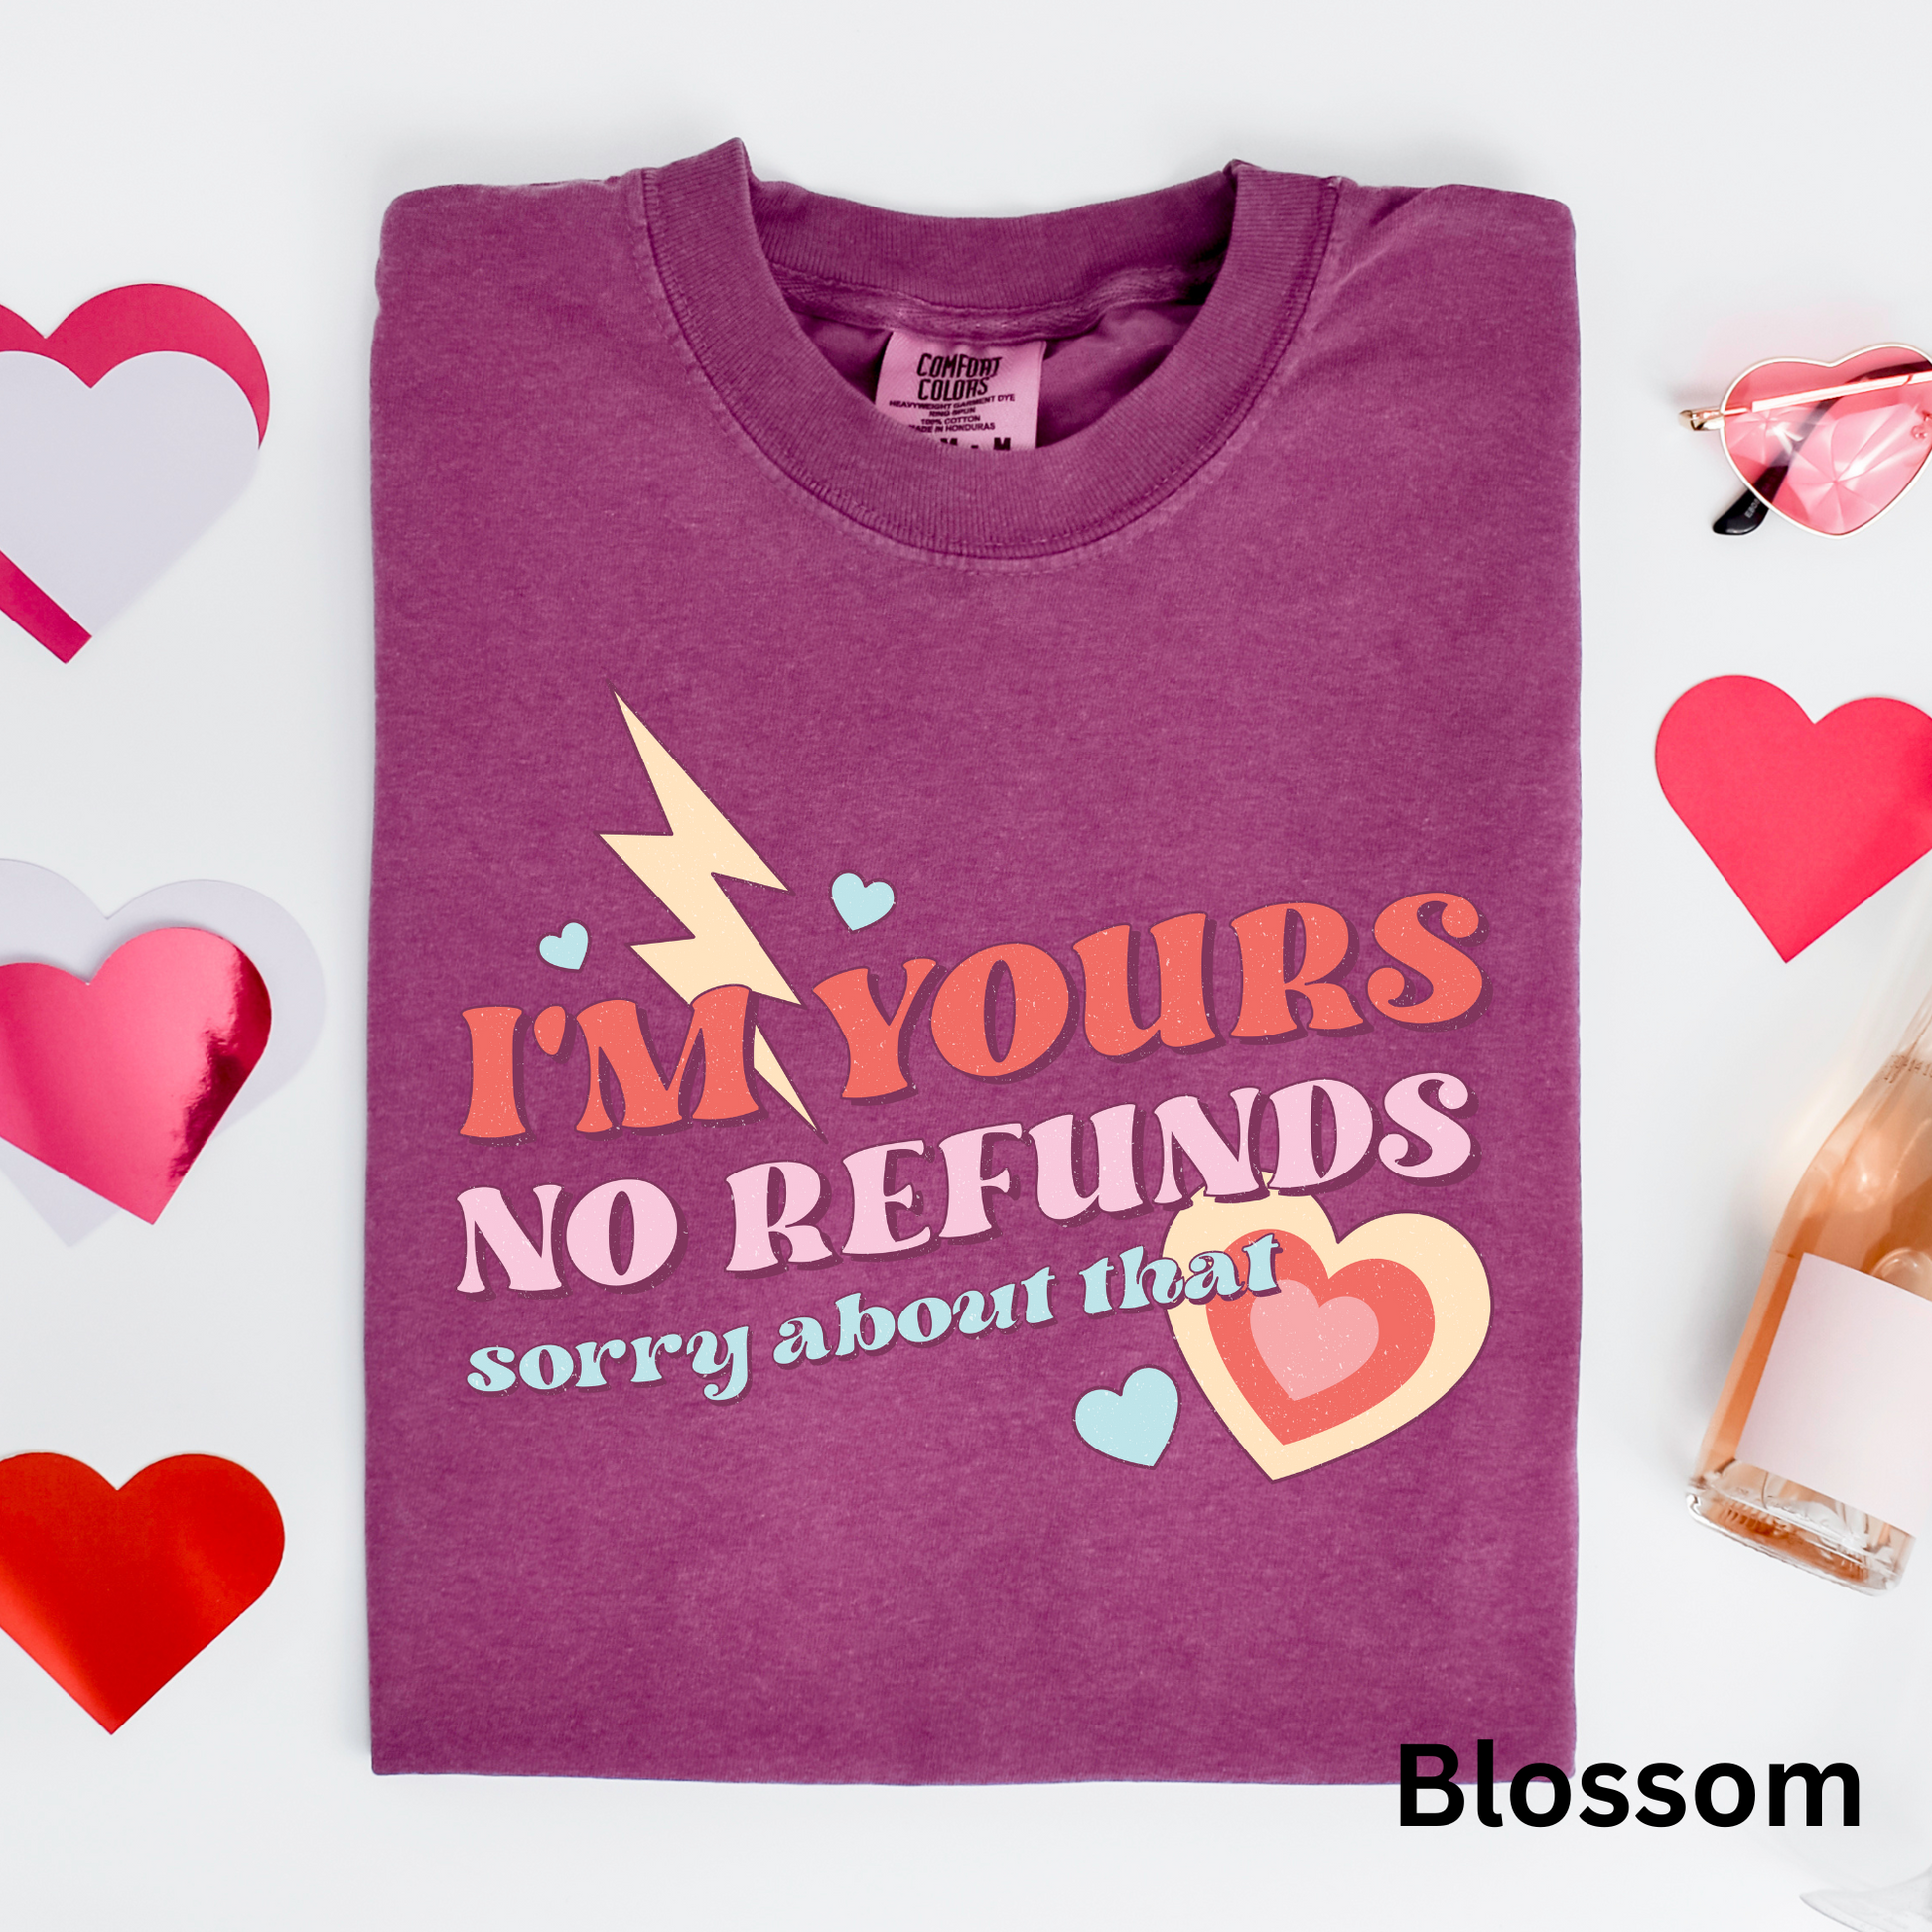 a t - shirt that says i'm yours no refunds sorry about